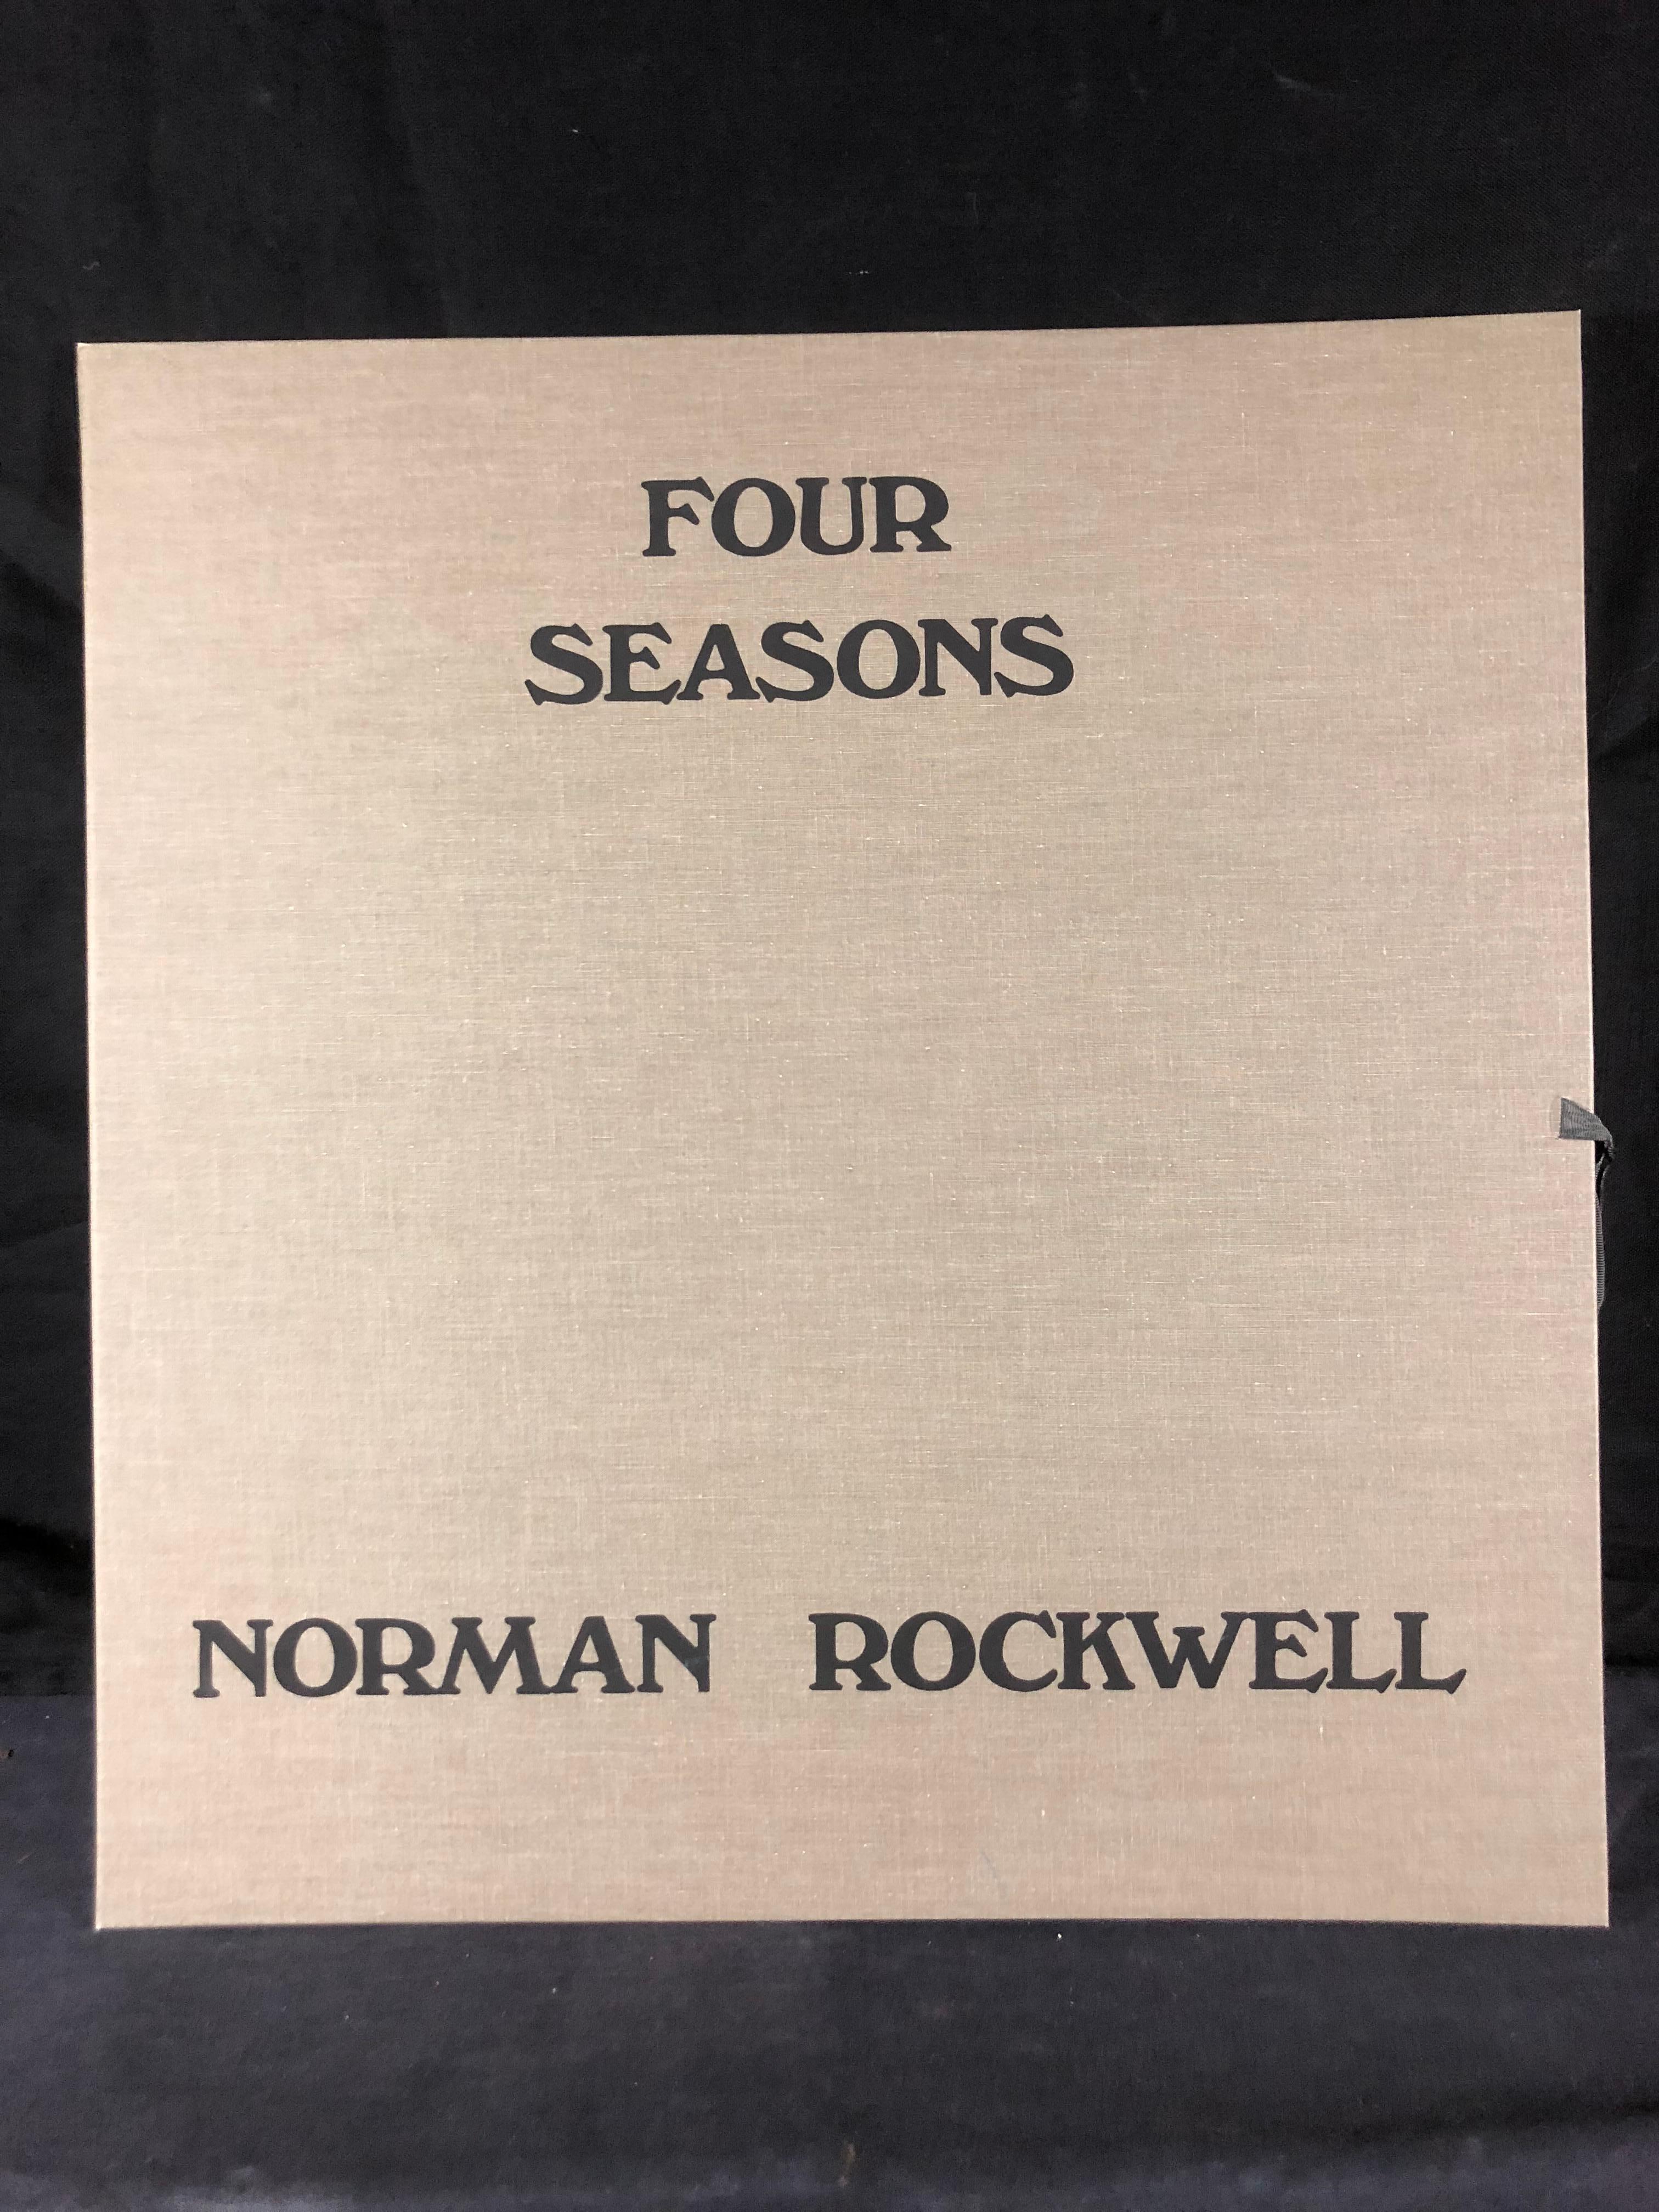 The Four Seasons Suite (Hand-Signed & Numbered) 1